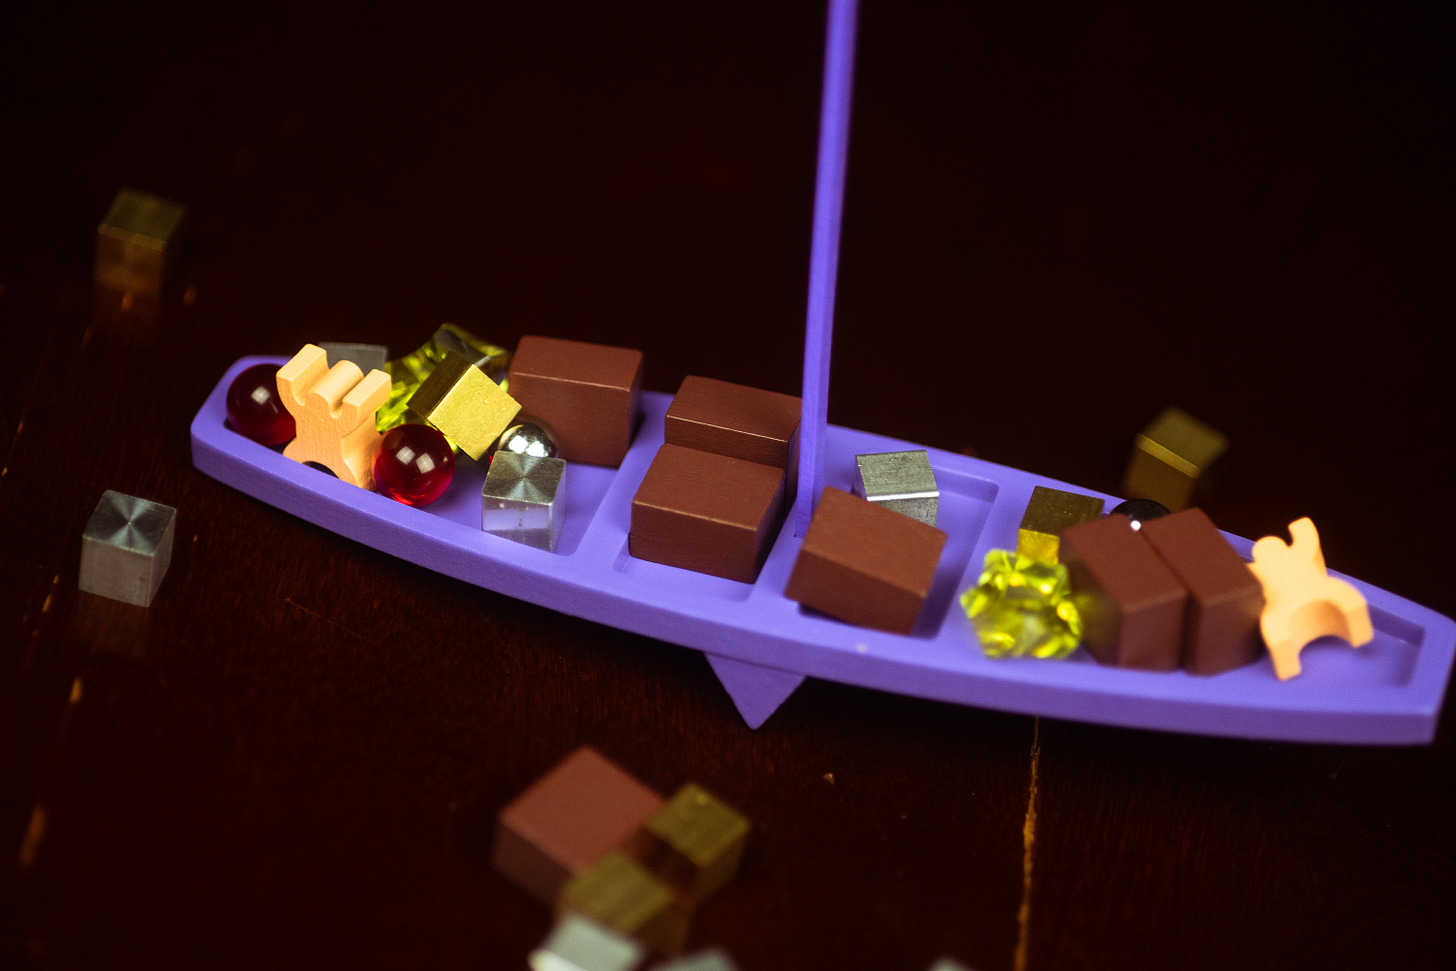 The board game Viking See-Saw, with many small pieces of cargo placed on a purple ship.